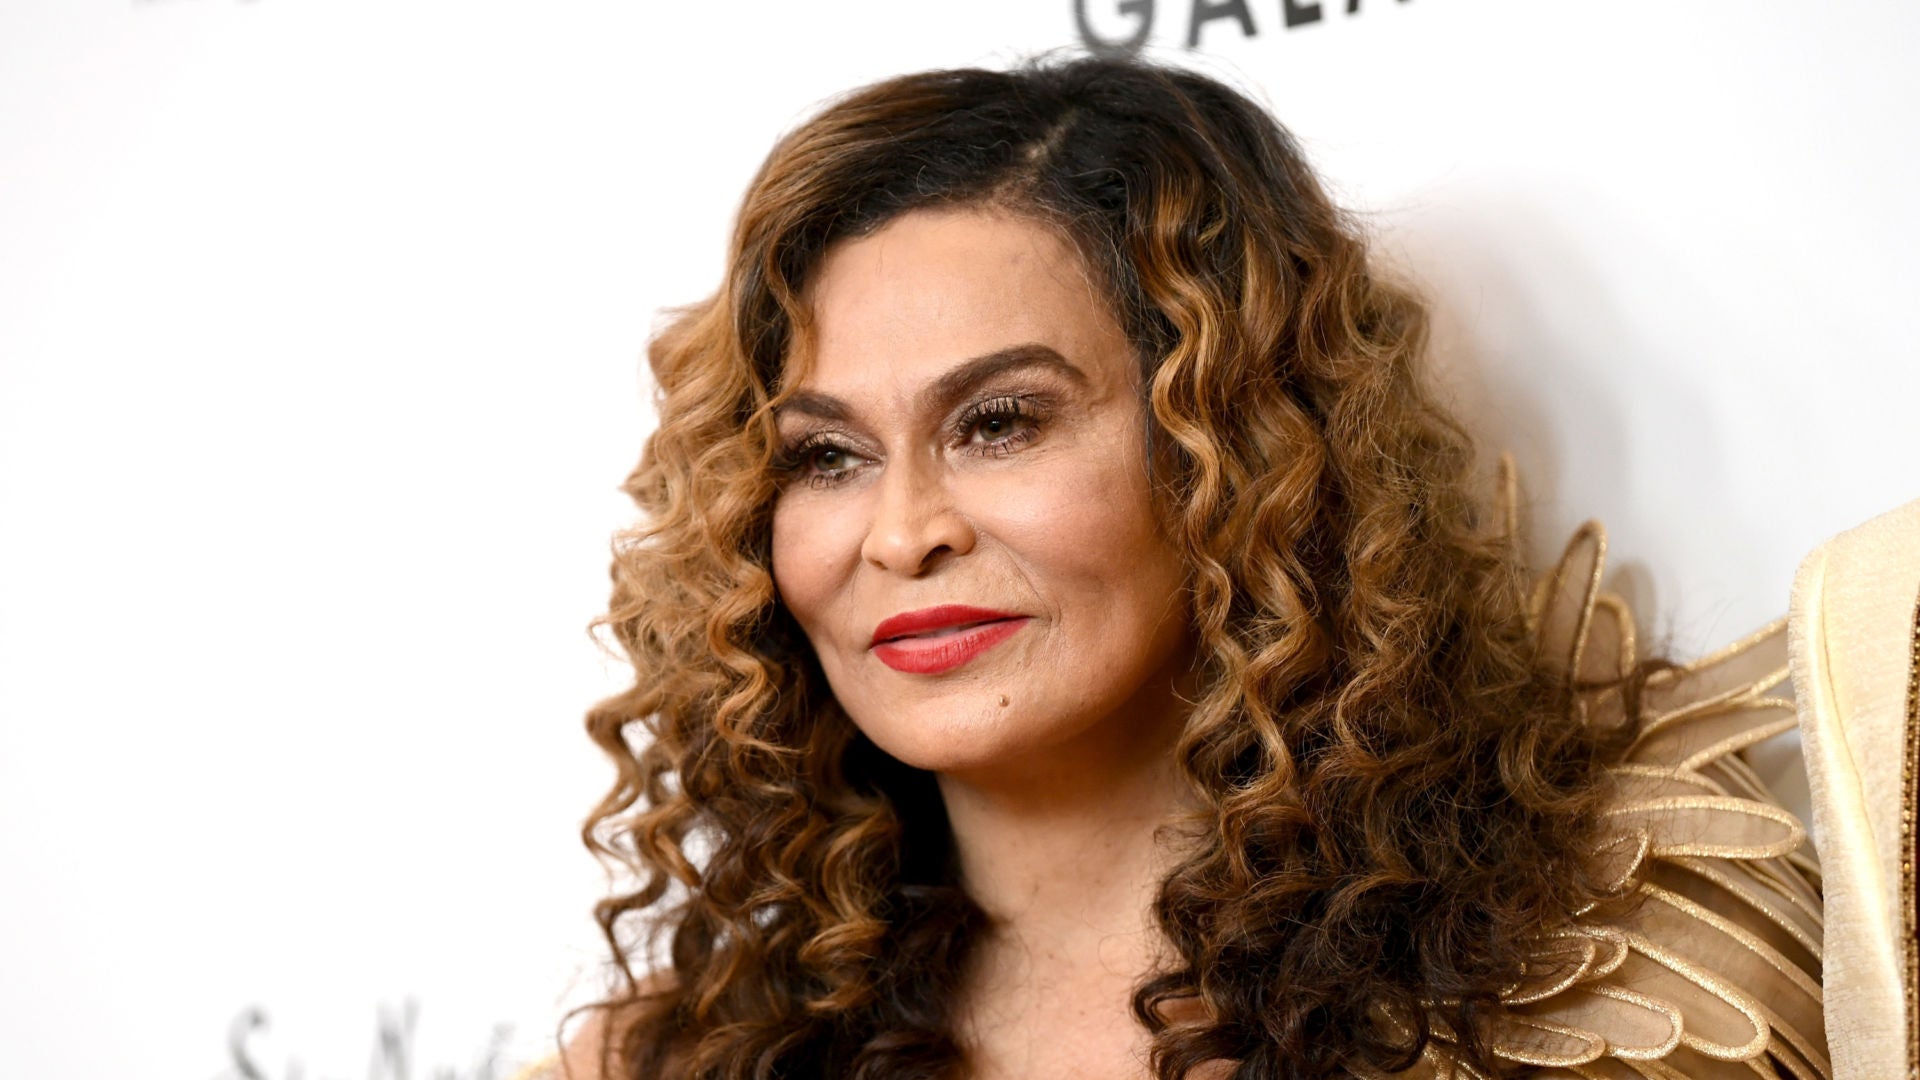 Kerry Washington Taps Tina Knowles Lawson To Bring 'Dad Jokes' To Your Timeline